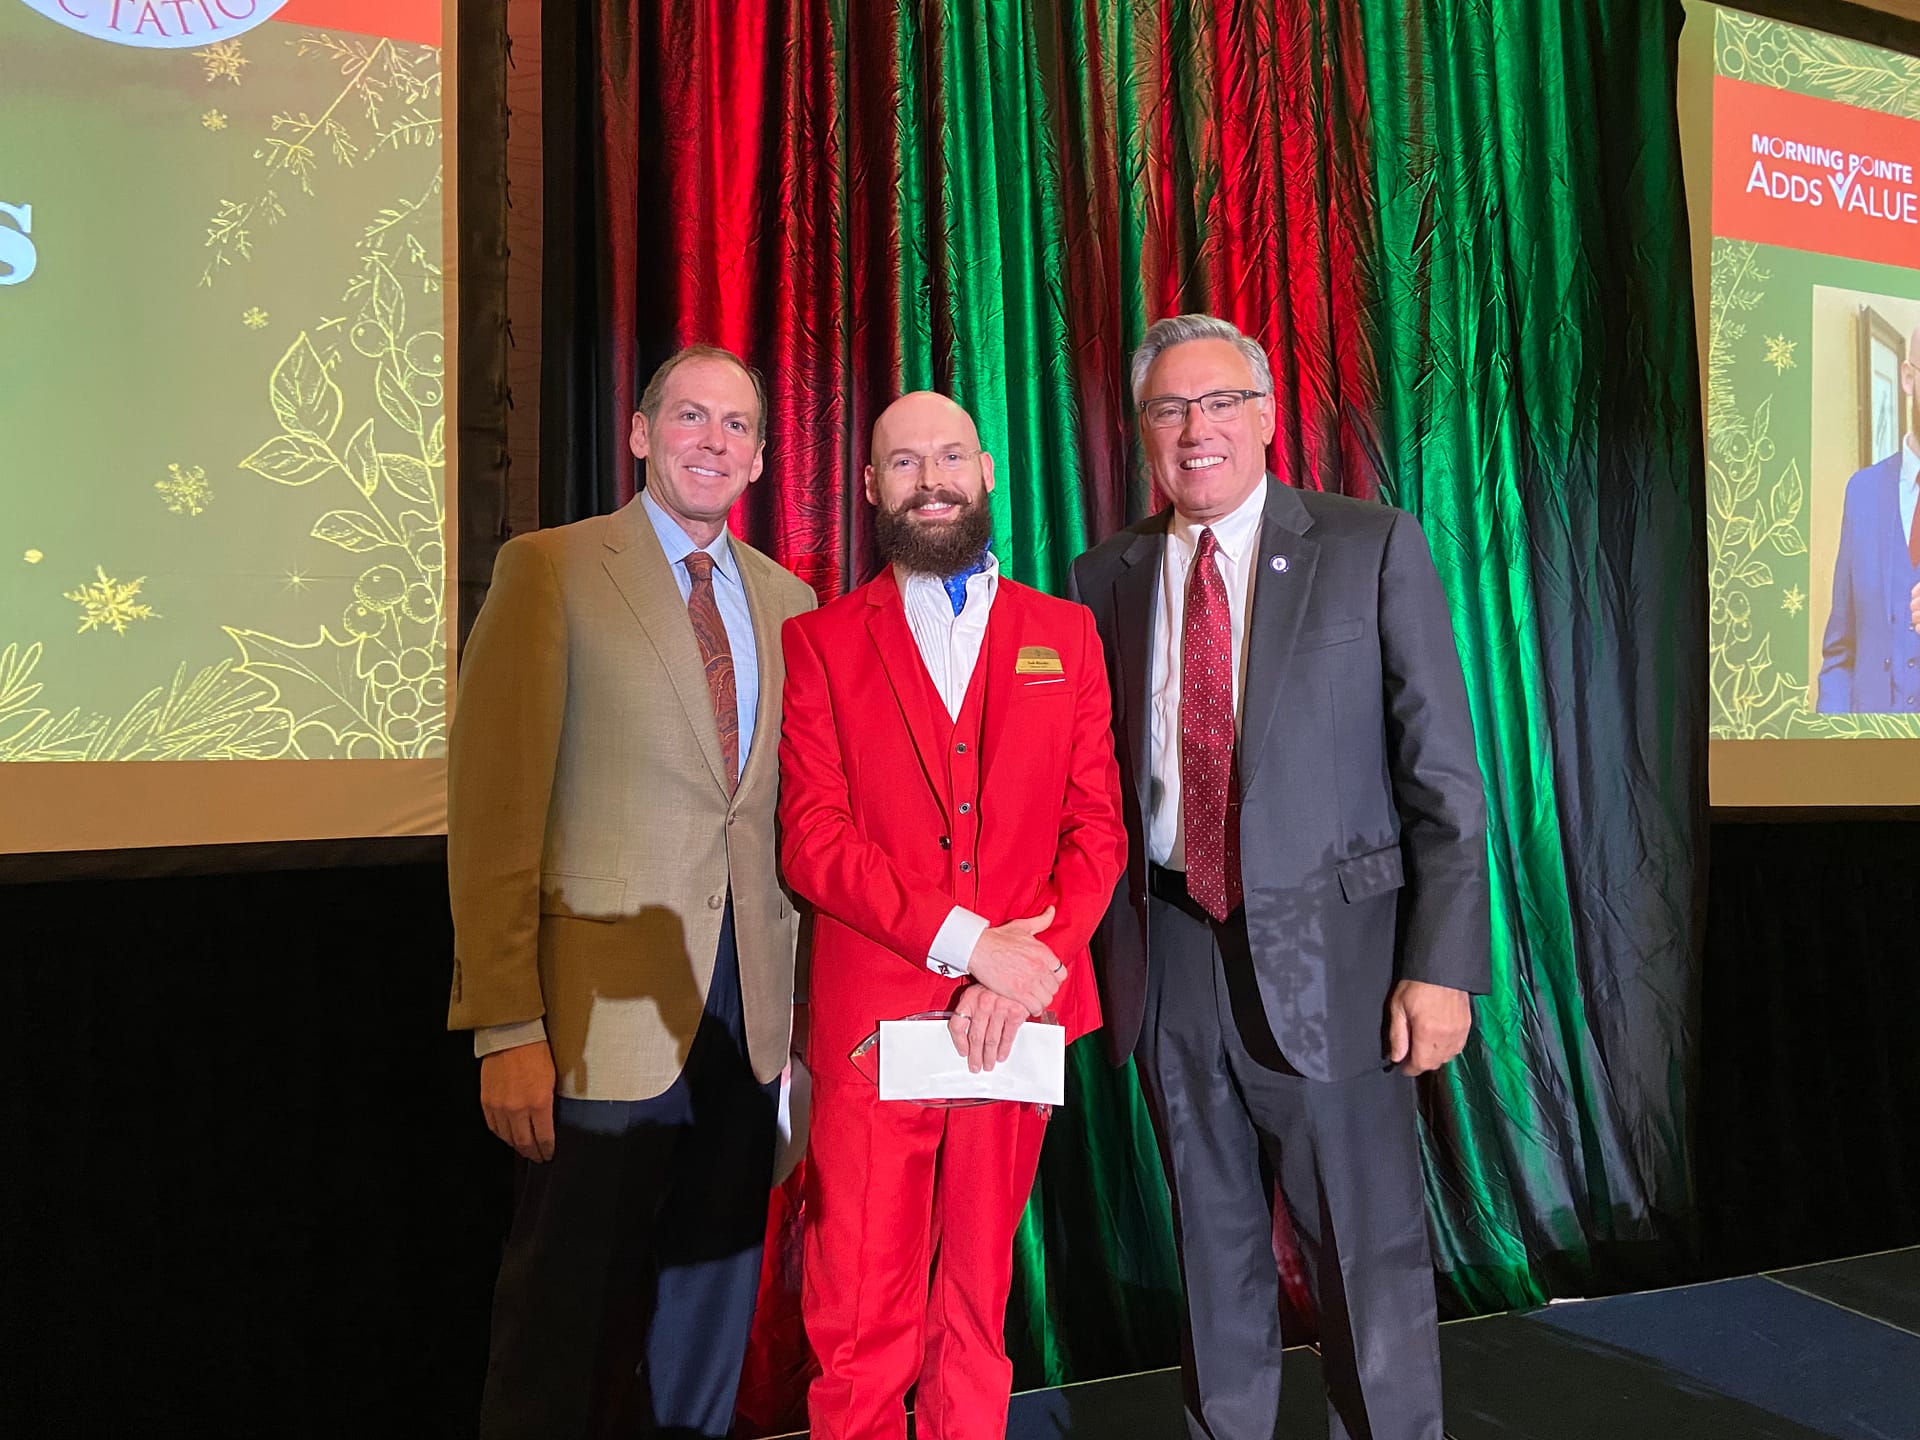 Photo, left to right: Franklin Farrow, Morning Pointe Senior Living Co-Founder and CEO; Josh Rhodes, Morning Pointe's Director of Information Technology and Exceeding Expectations winner for the Home Office; and Greg A. Vital, Morning Pointe Co-Founder and President 